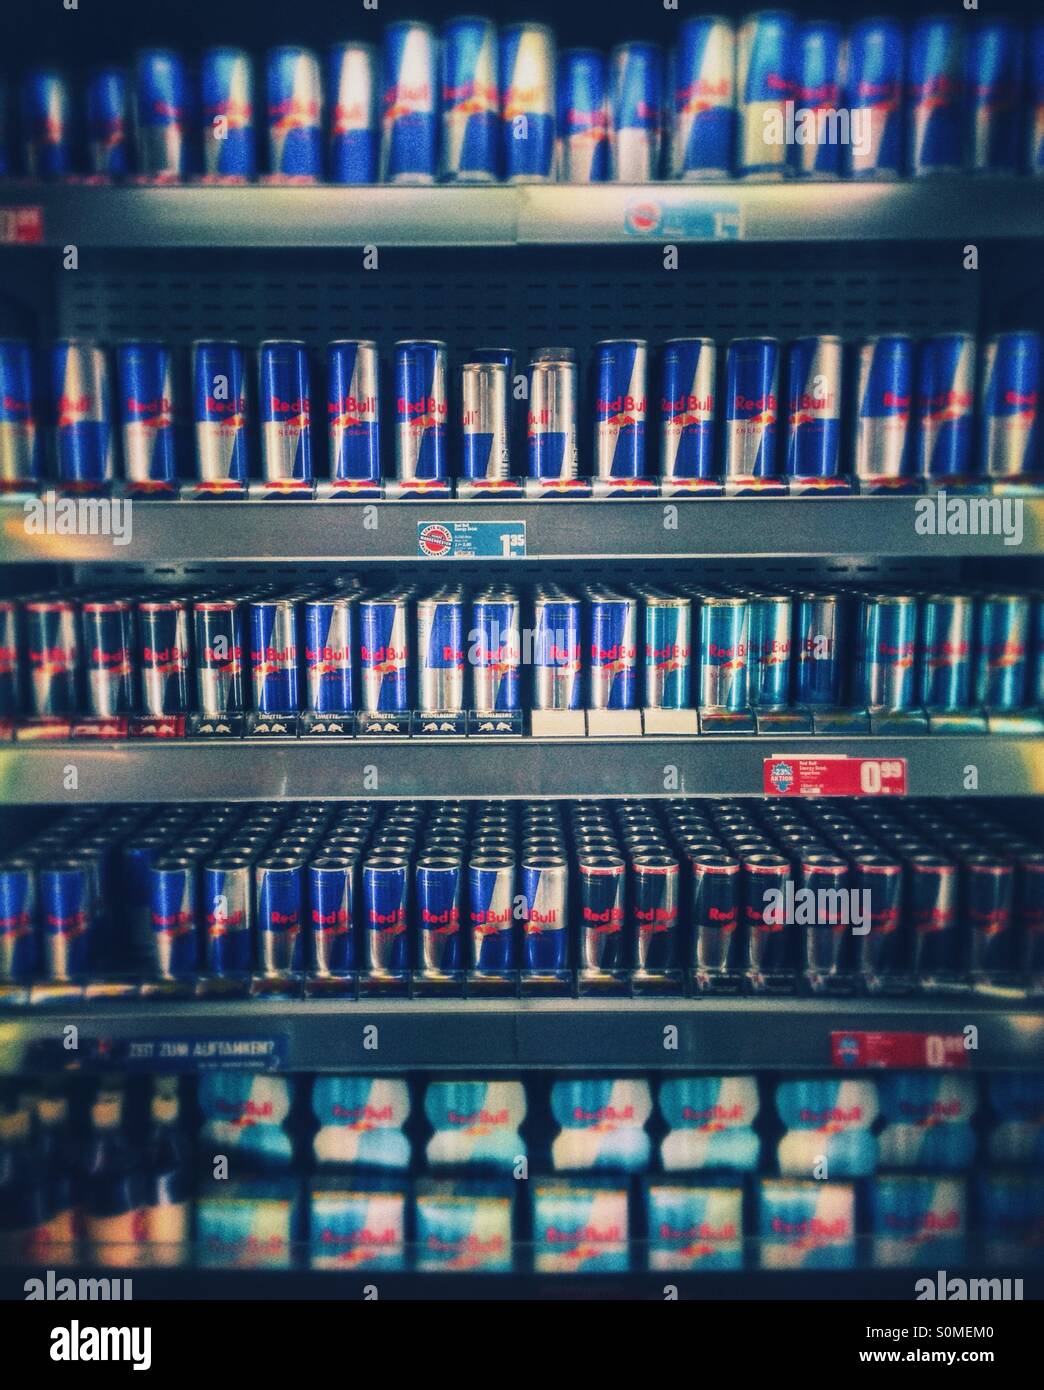 A display of Red Bull cans in a cooling shelf in a supermarket Stock Photo